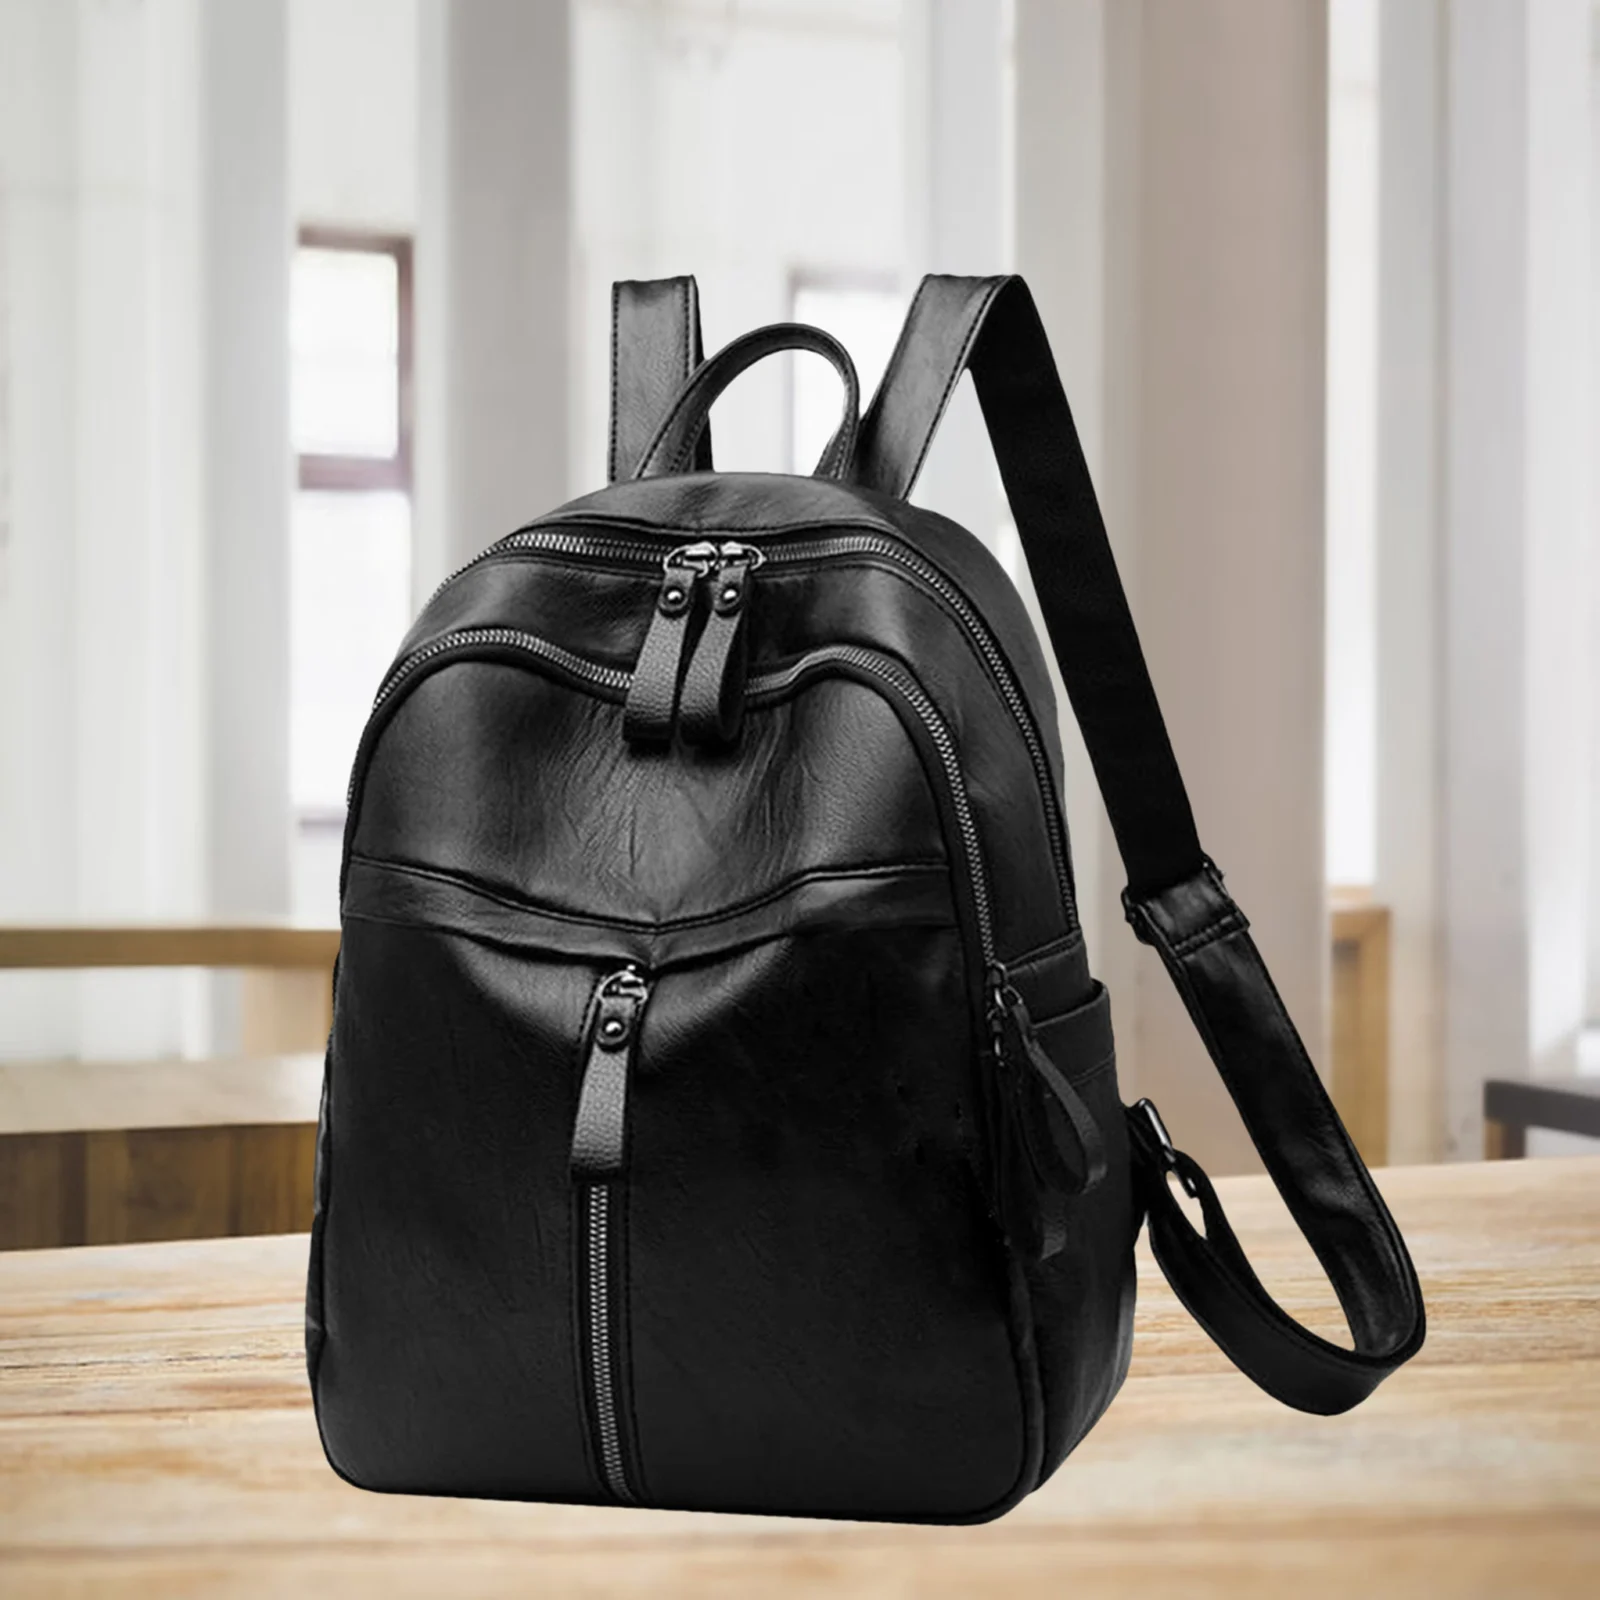 Cute Women Backpack PU Leather Travel Casual Purse Schoolbag Small Tote